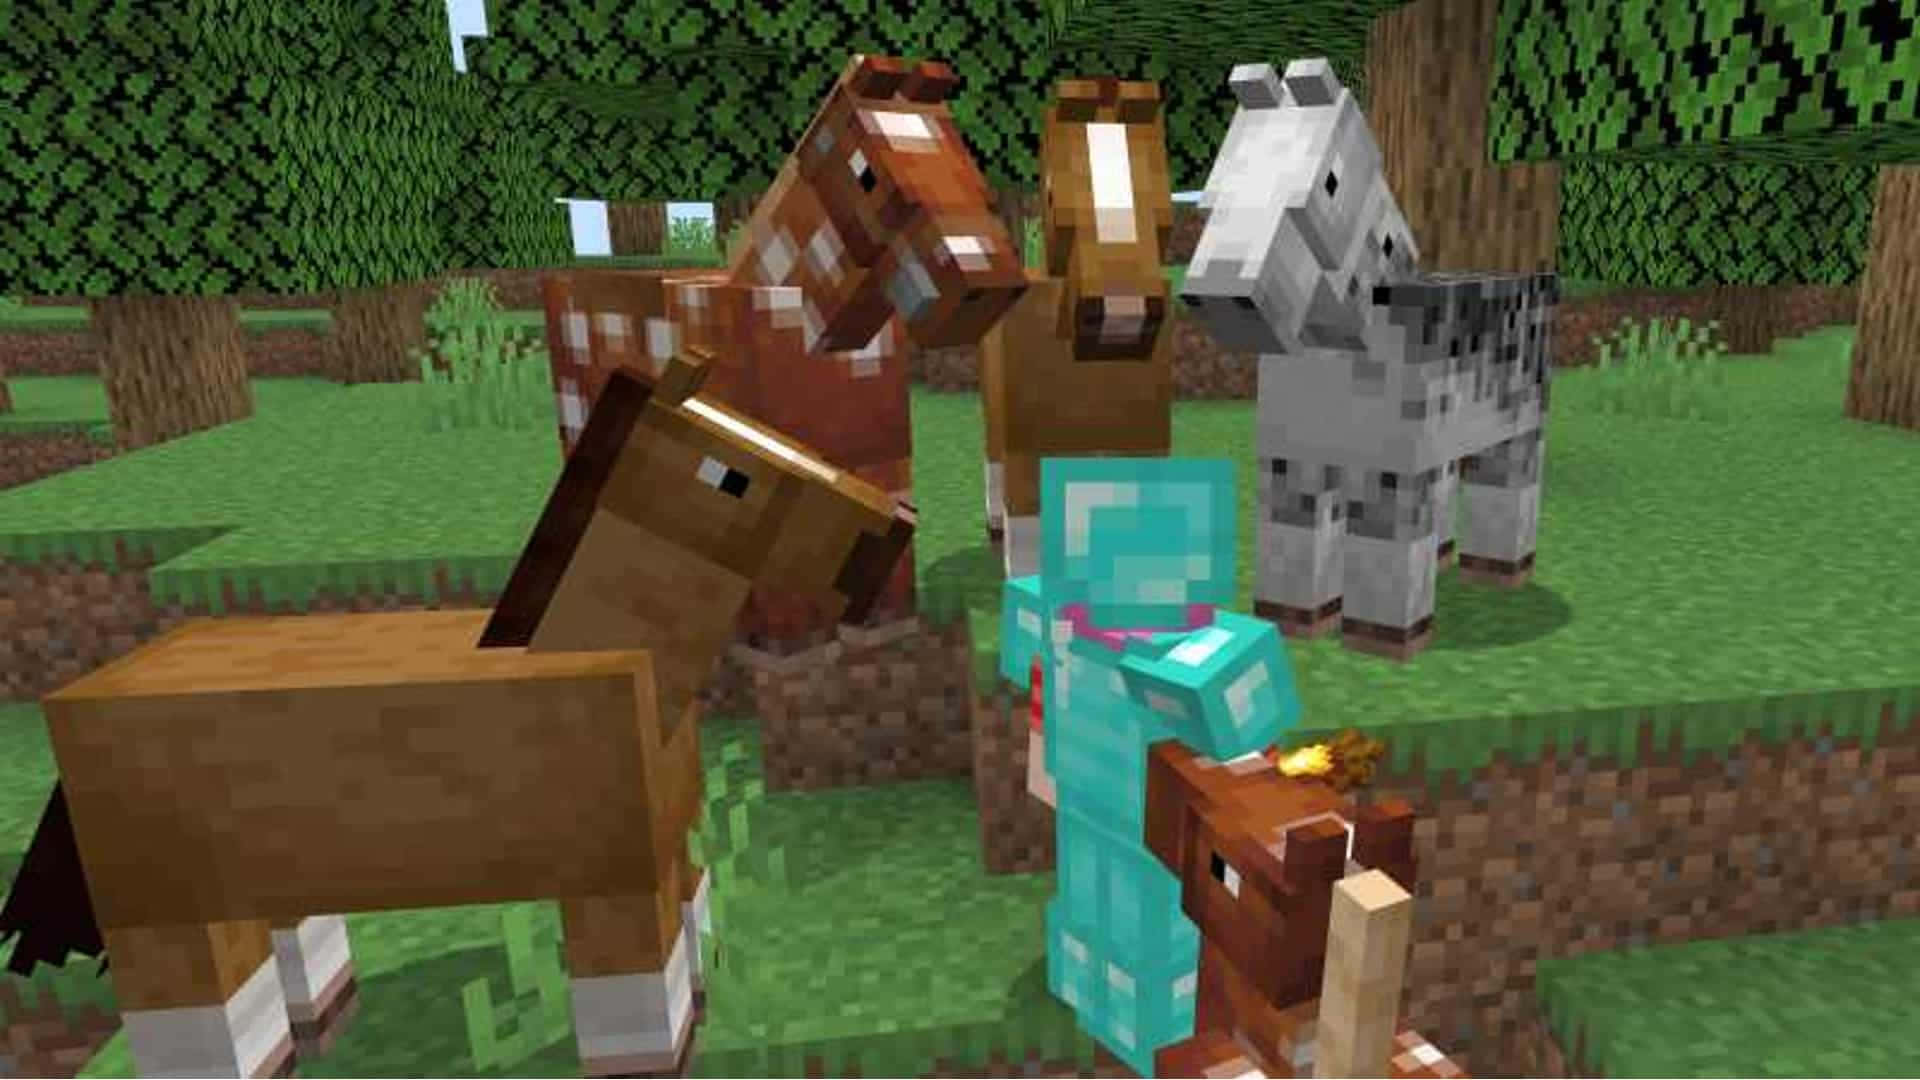 Galloping in a Vibrant Minecraft World with Horses Wallpaper